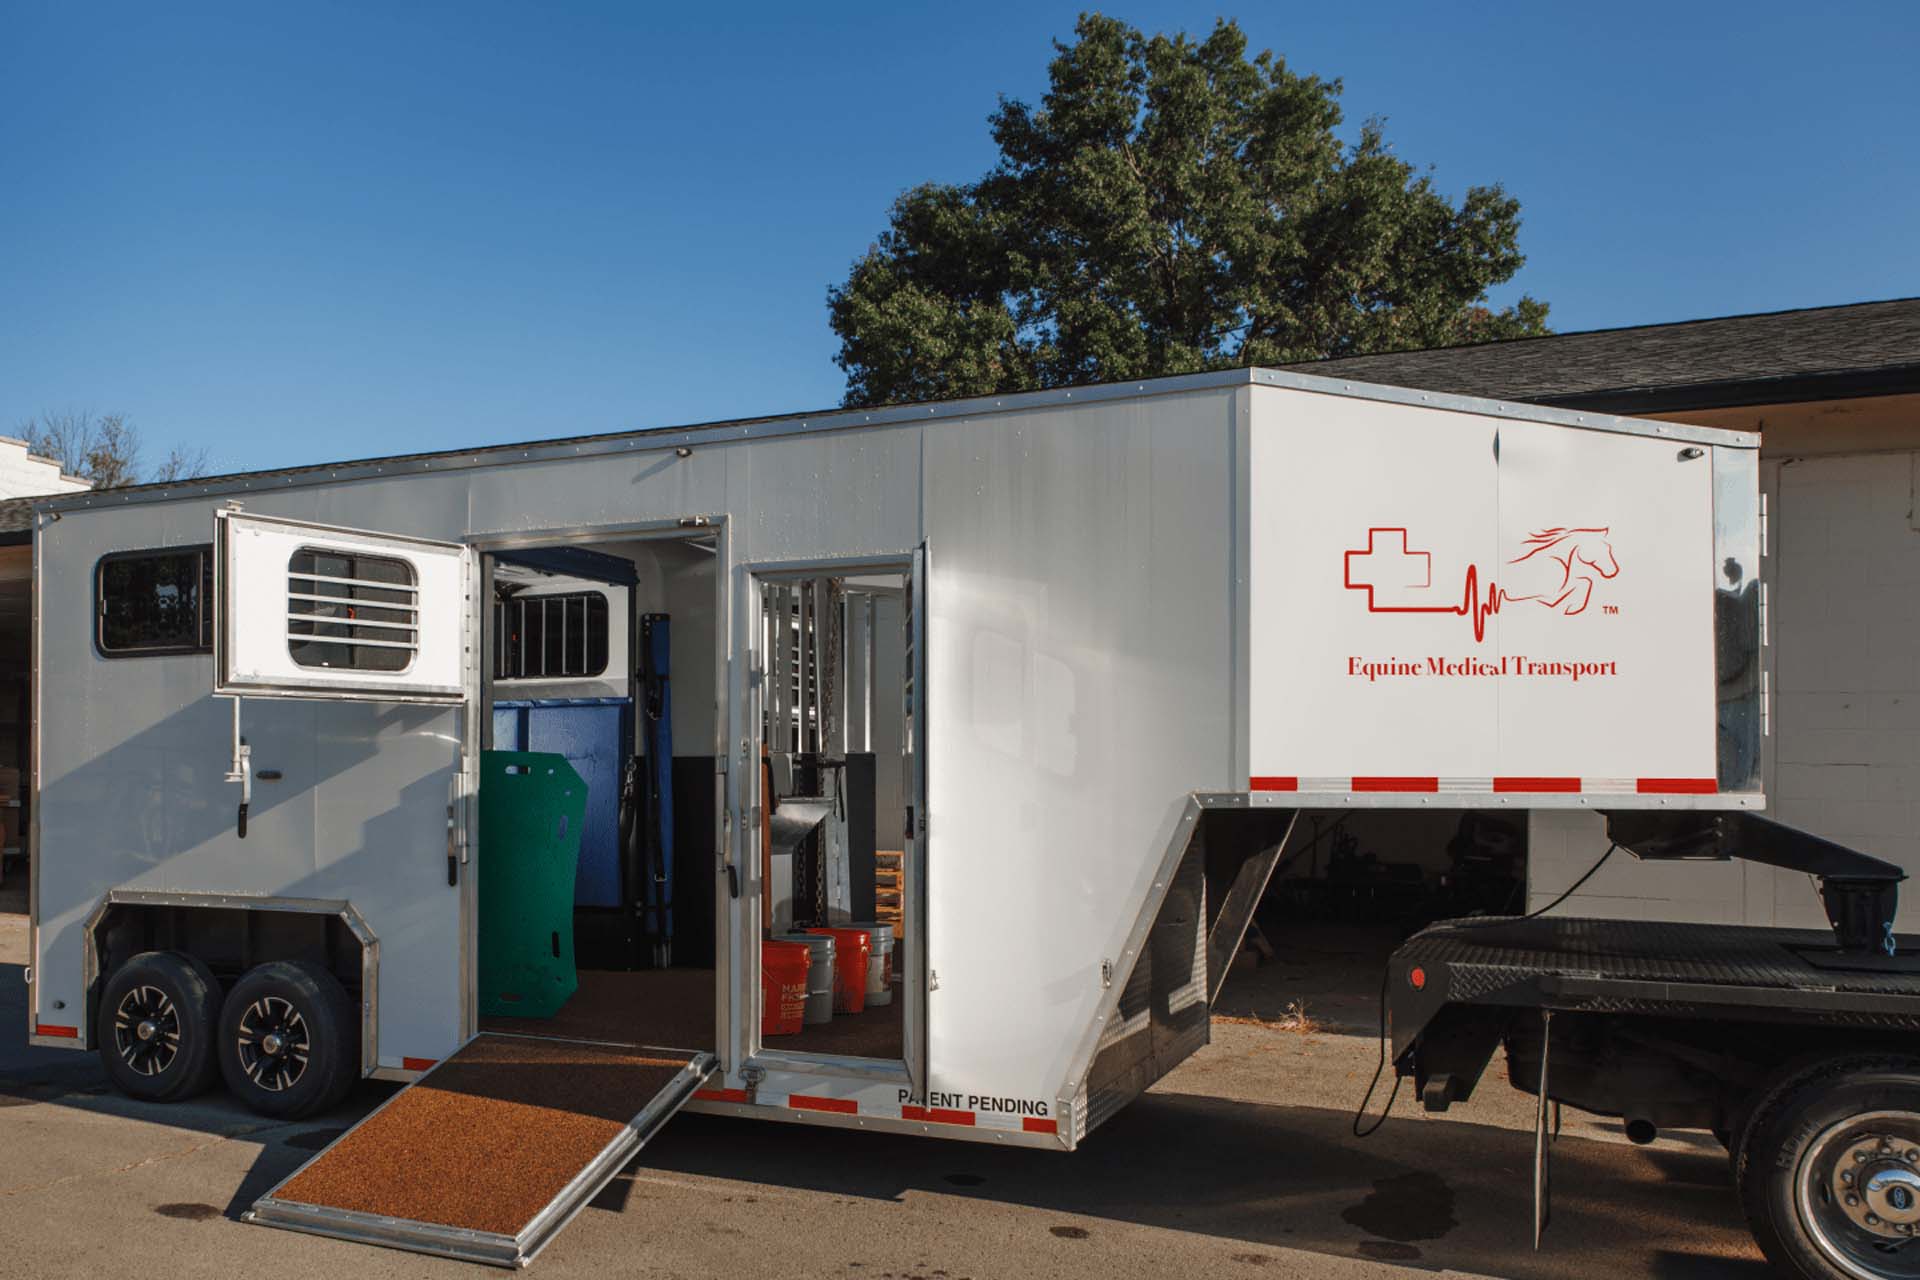 A picture of a State-of-the-art Equine Ambulance. It’s a white trailer hitched to the back of a black truck that has “Equine Medical Transport” printed on it.